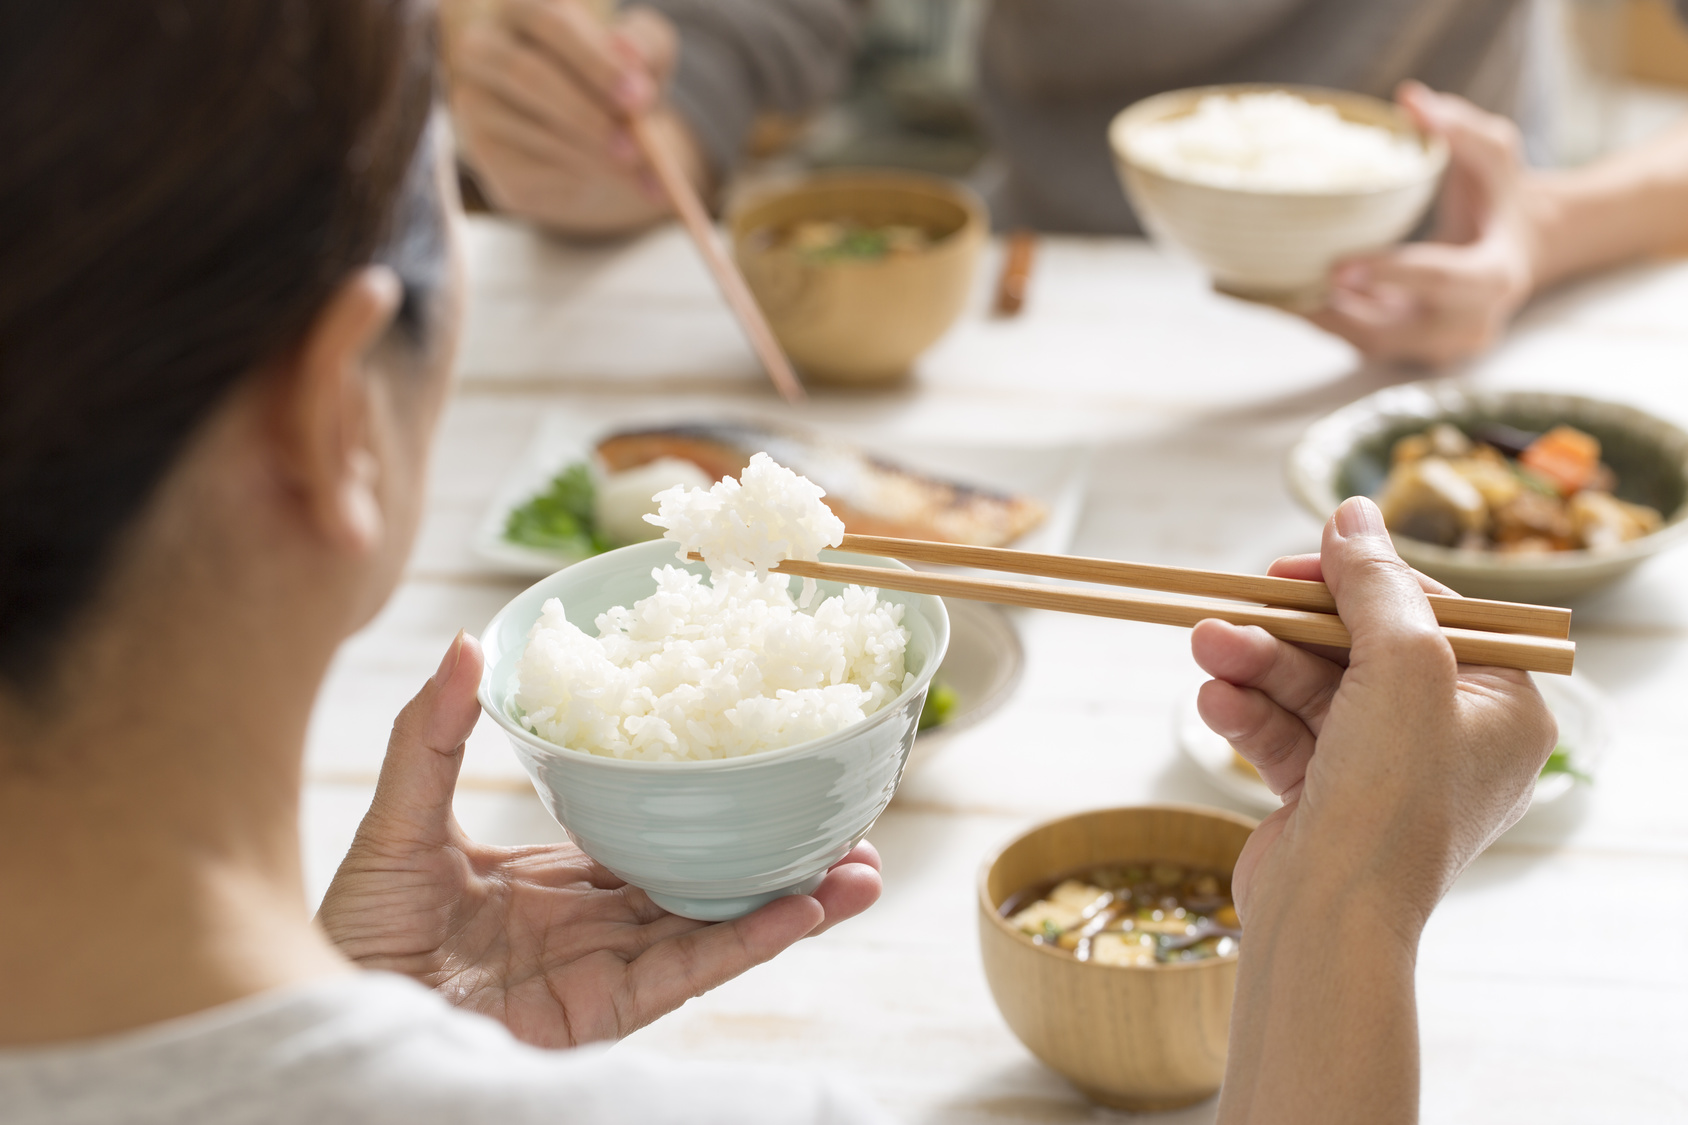 7 unknown benefits of consuming rice #1